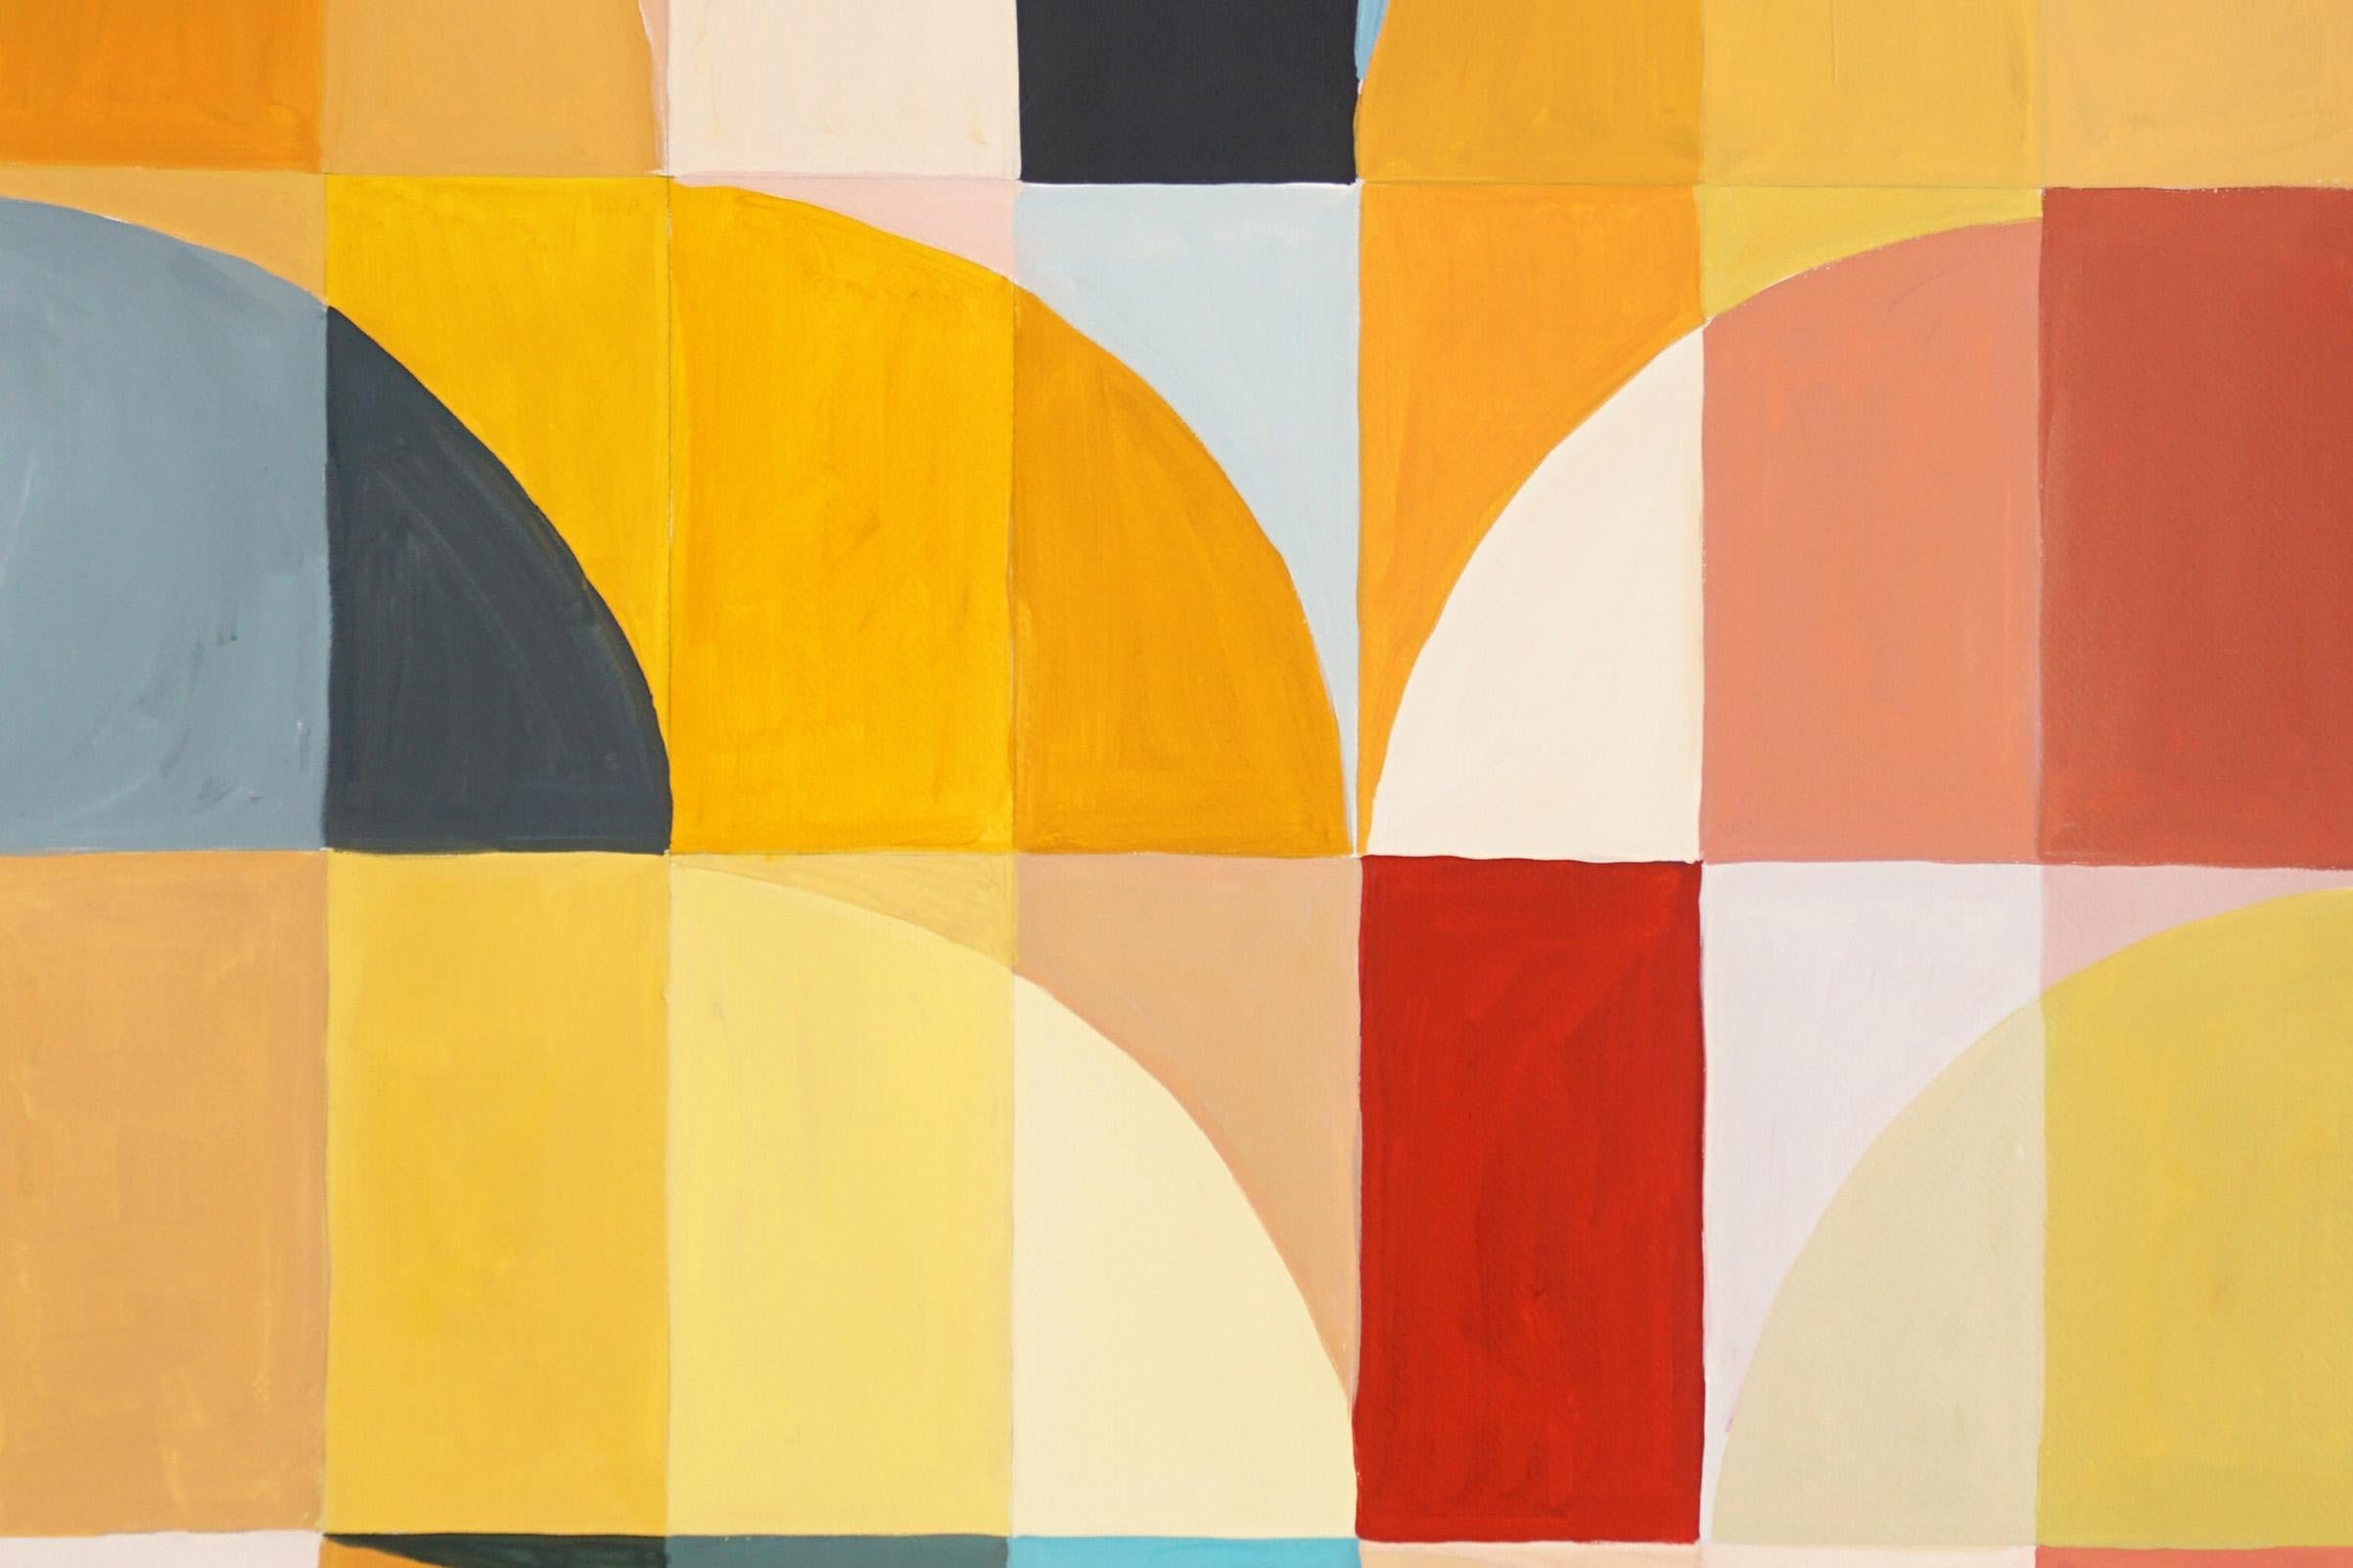 Primary Tones Arcs & Curves, Yellow, Blue and Red Bauhaus Grid, Large Triptych 6